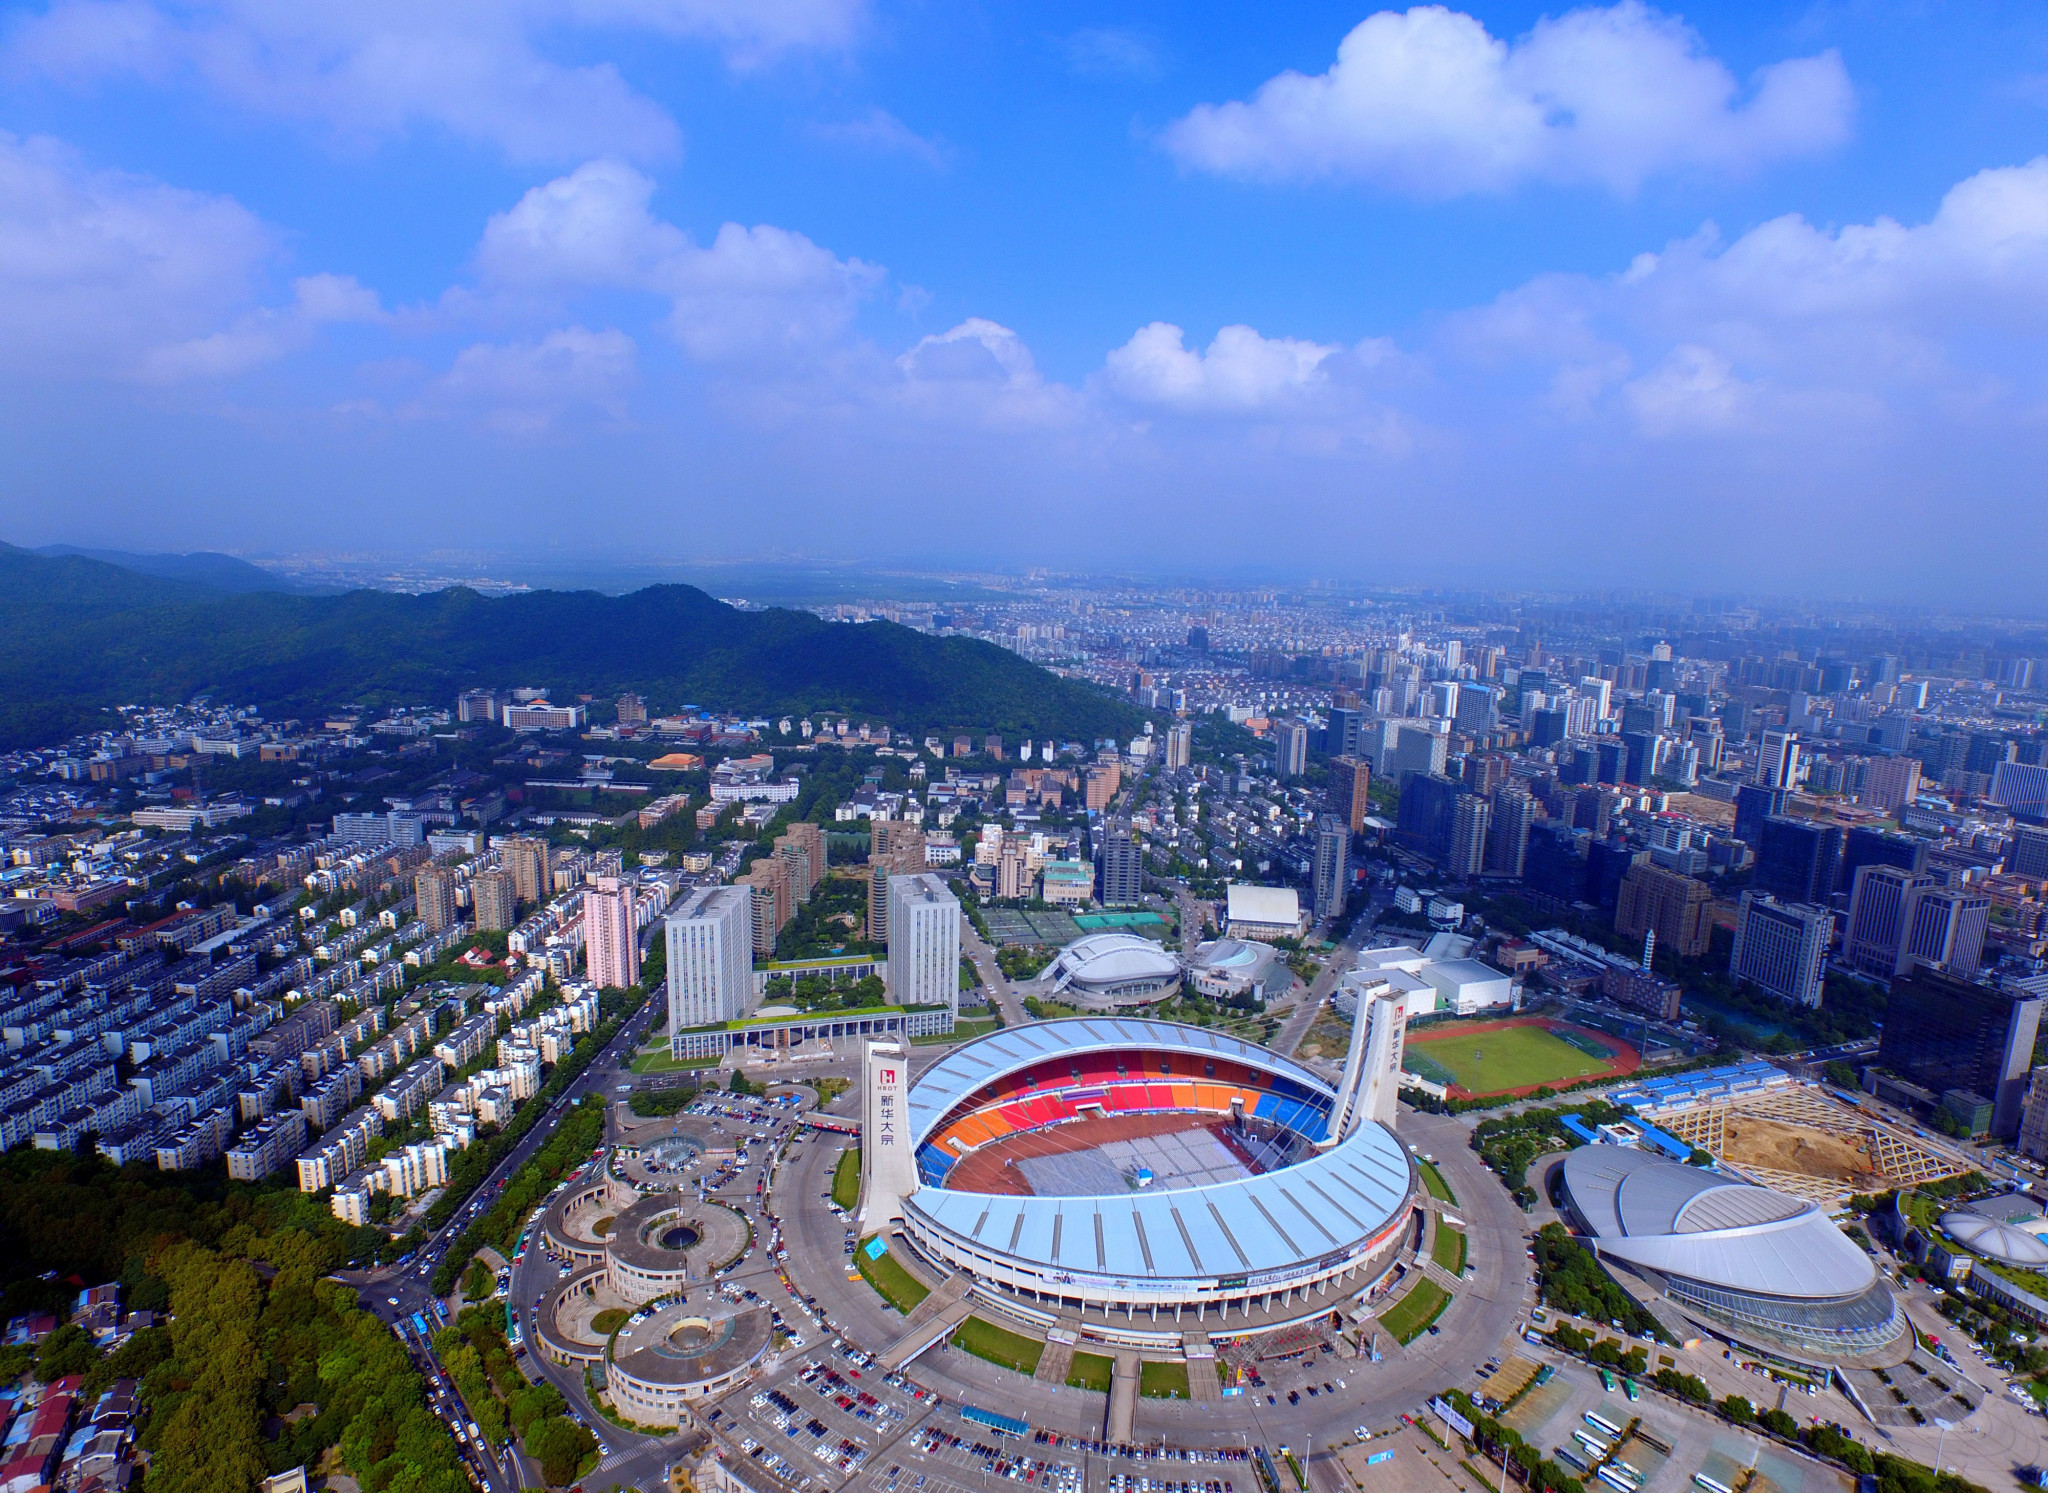 The Yellow Dragon Sports Center contains a major stadium which will be used for football, as well as other venues ©Hangzhou 2022